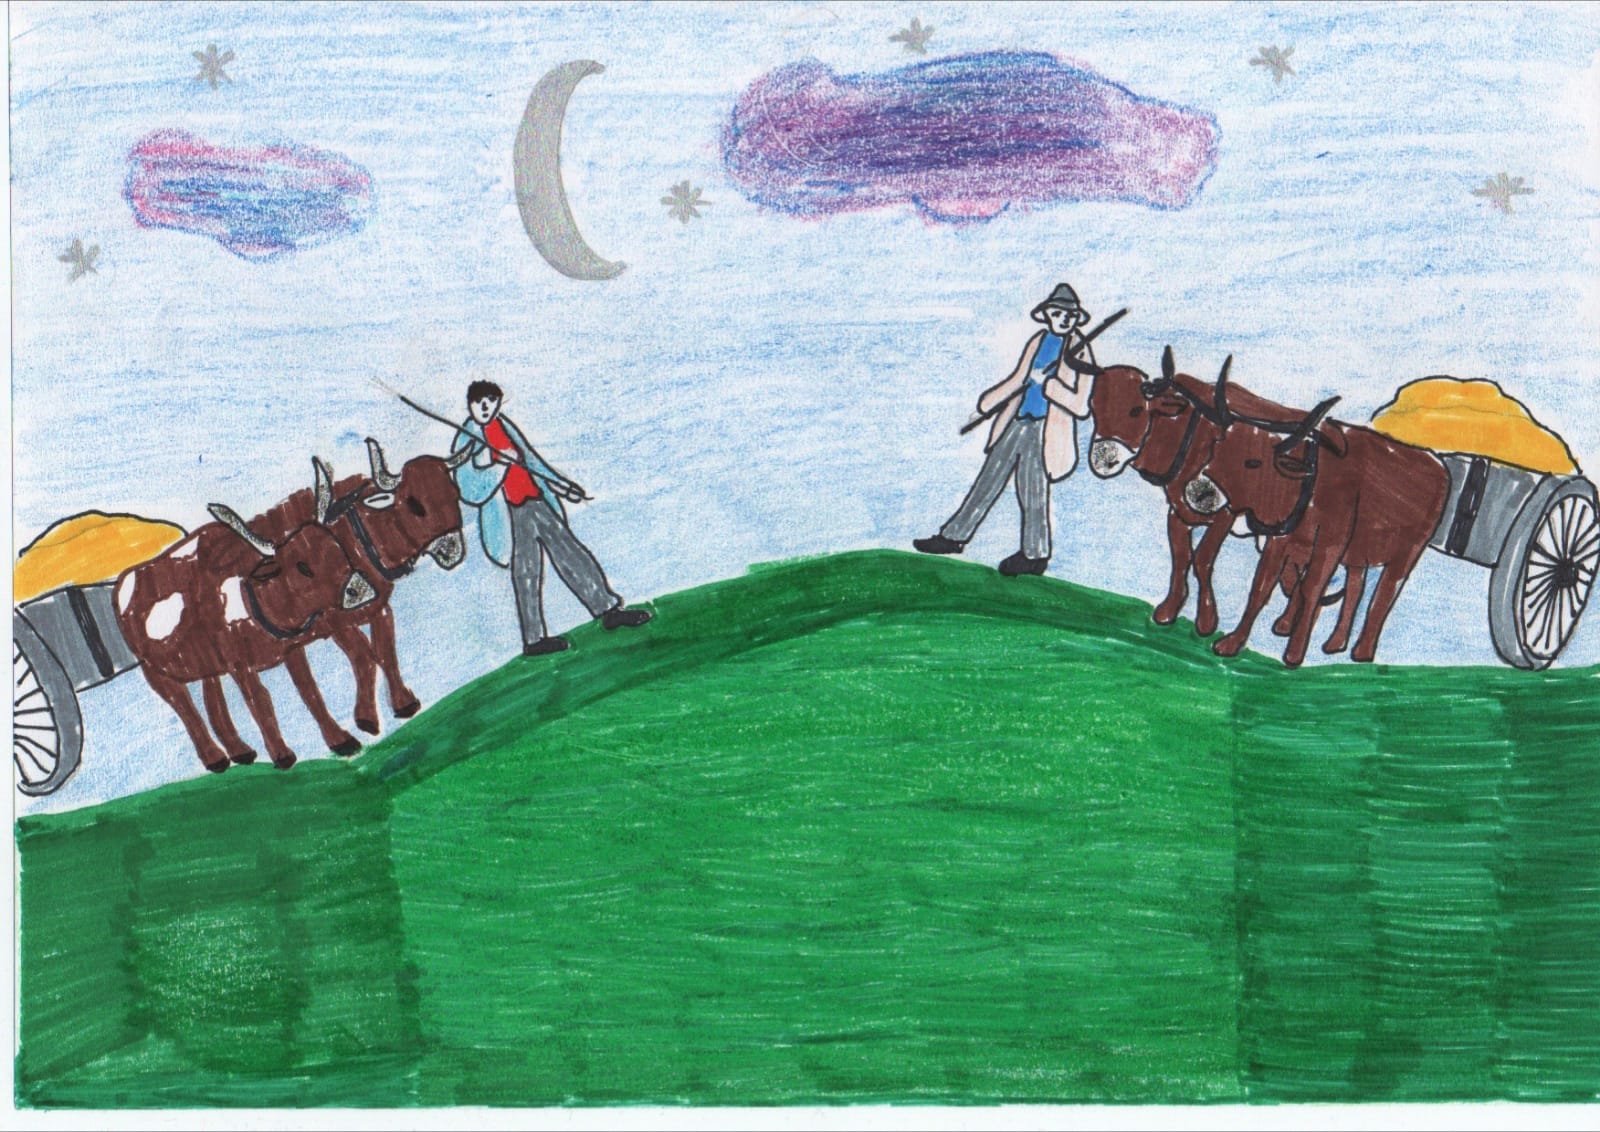 Growing up with Values from Storytelling - Romania - April 20 - Month of Sharing - Drawings about the story